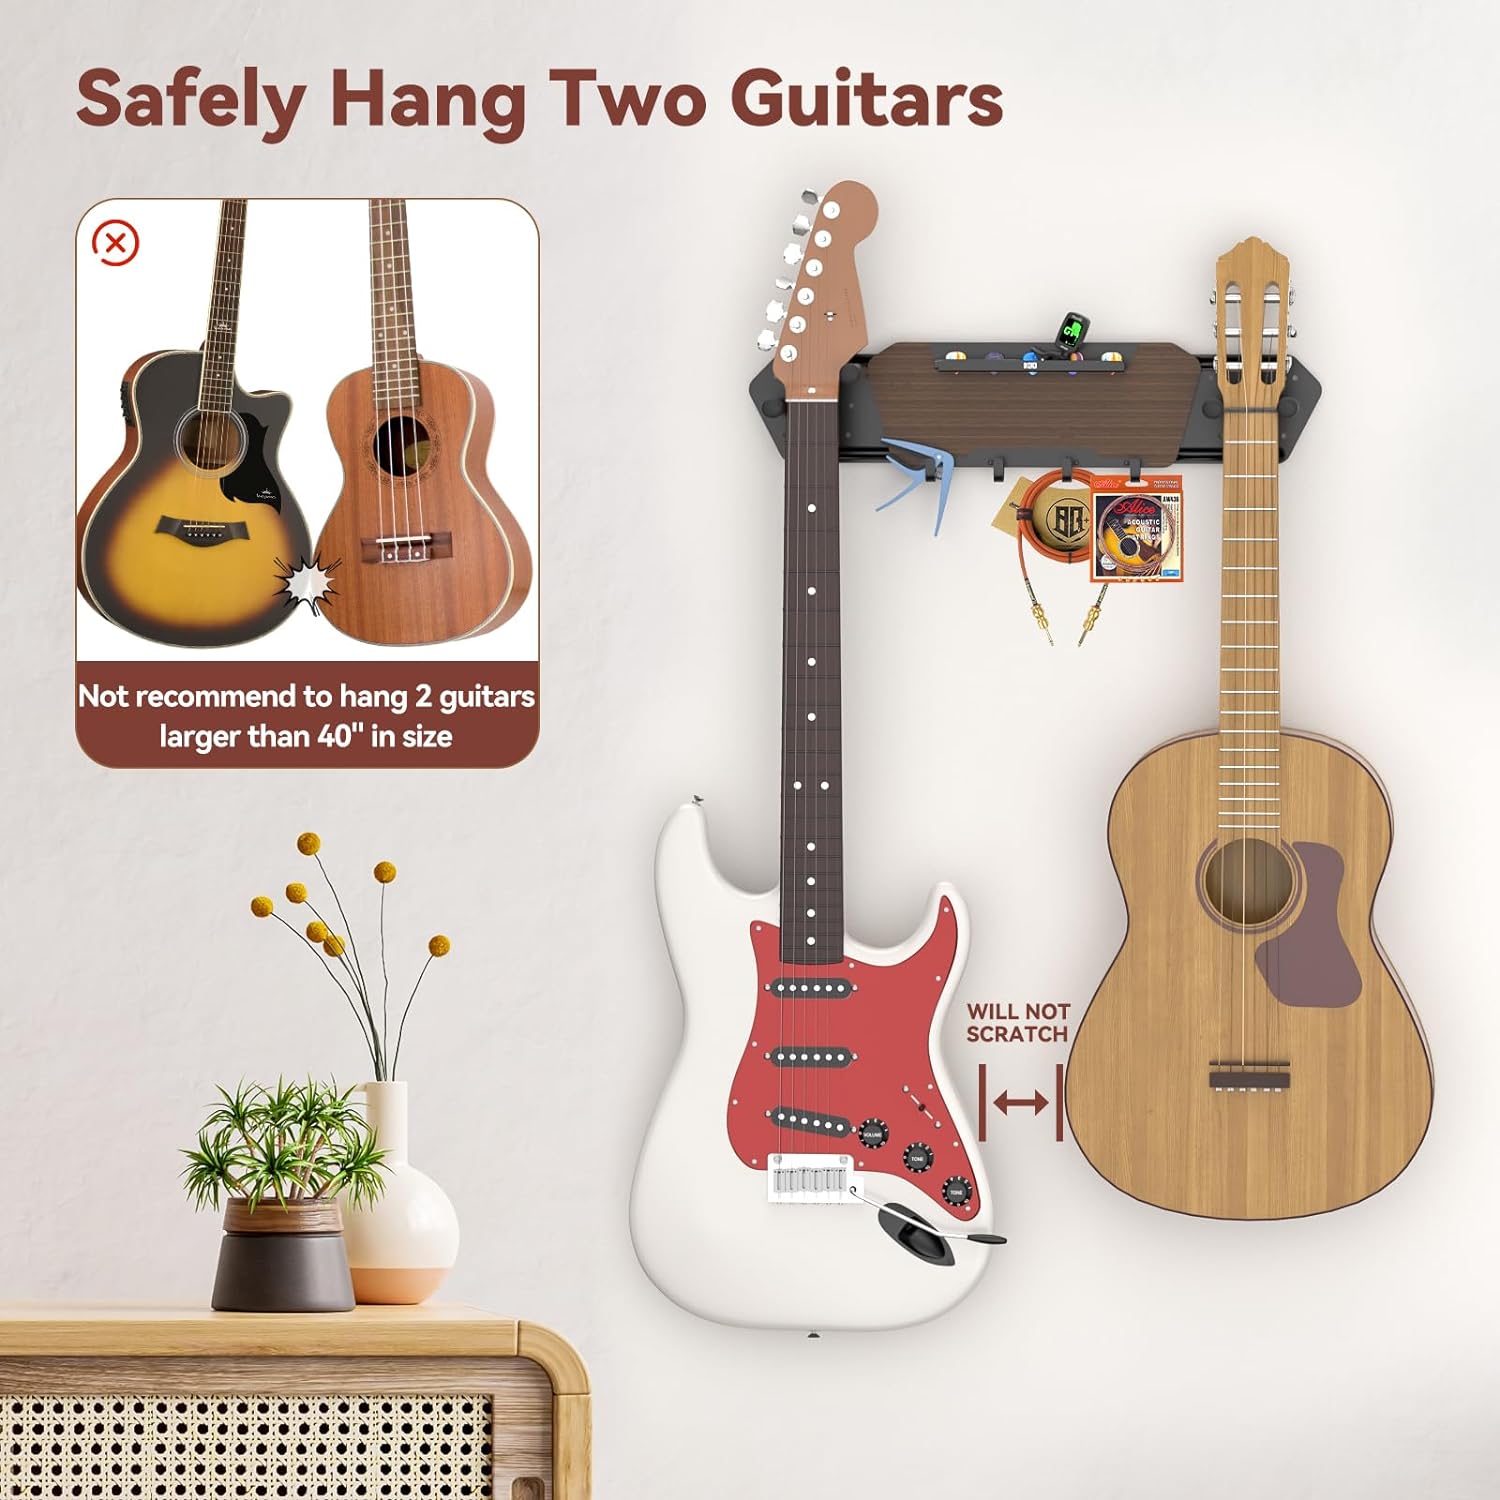 KDD Guitar Wall Mount with 4 Removable Rubber Hangers